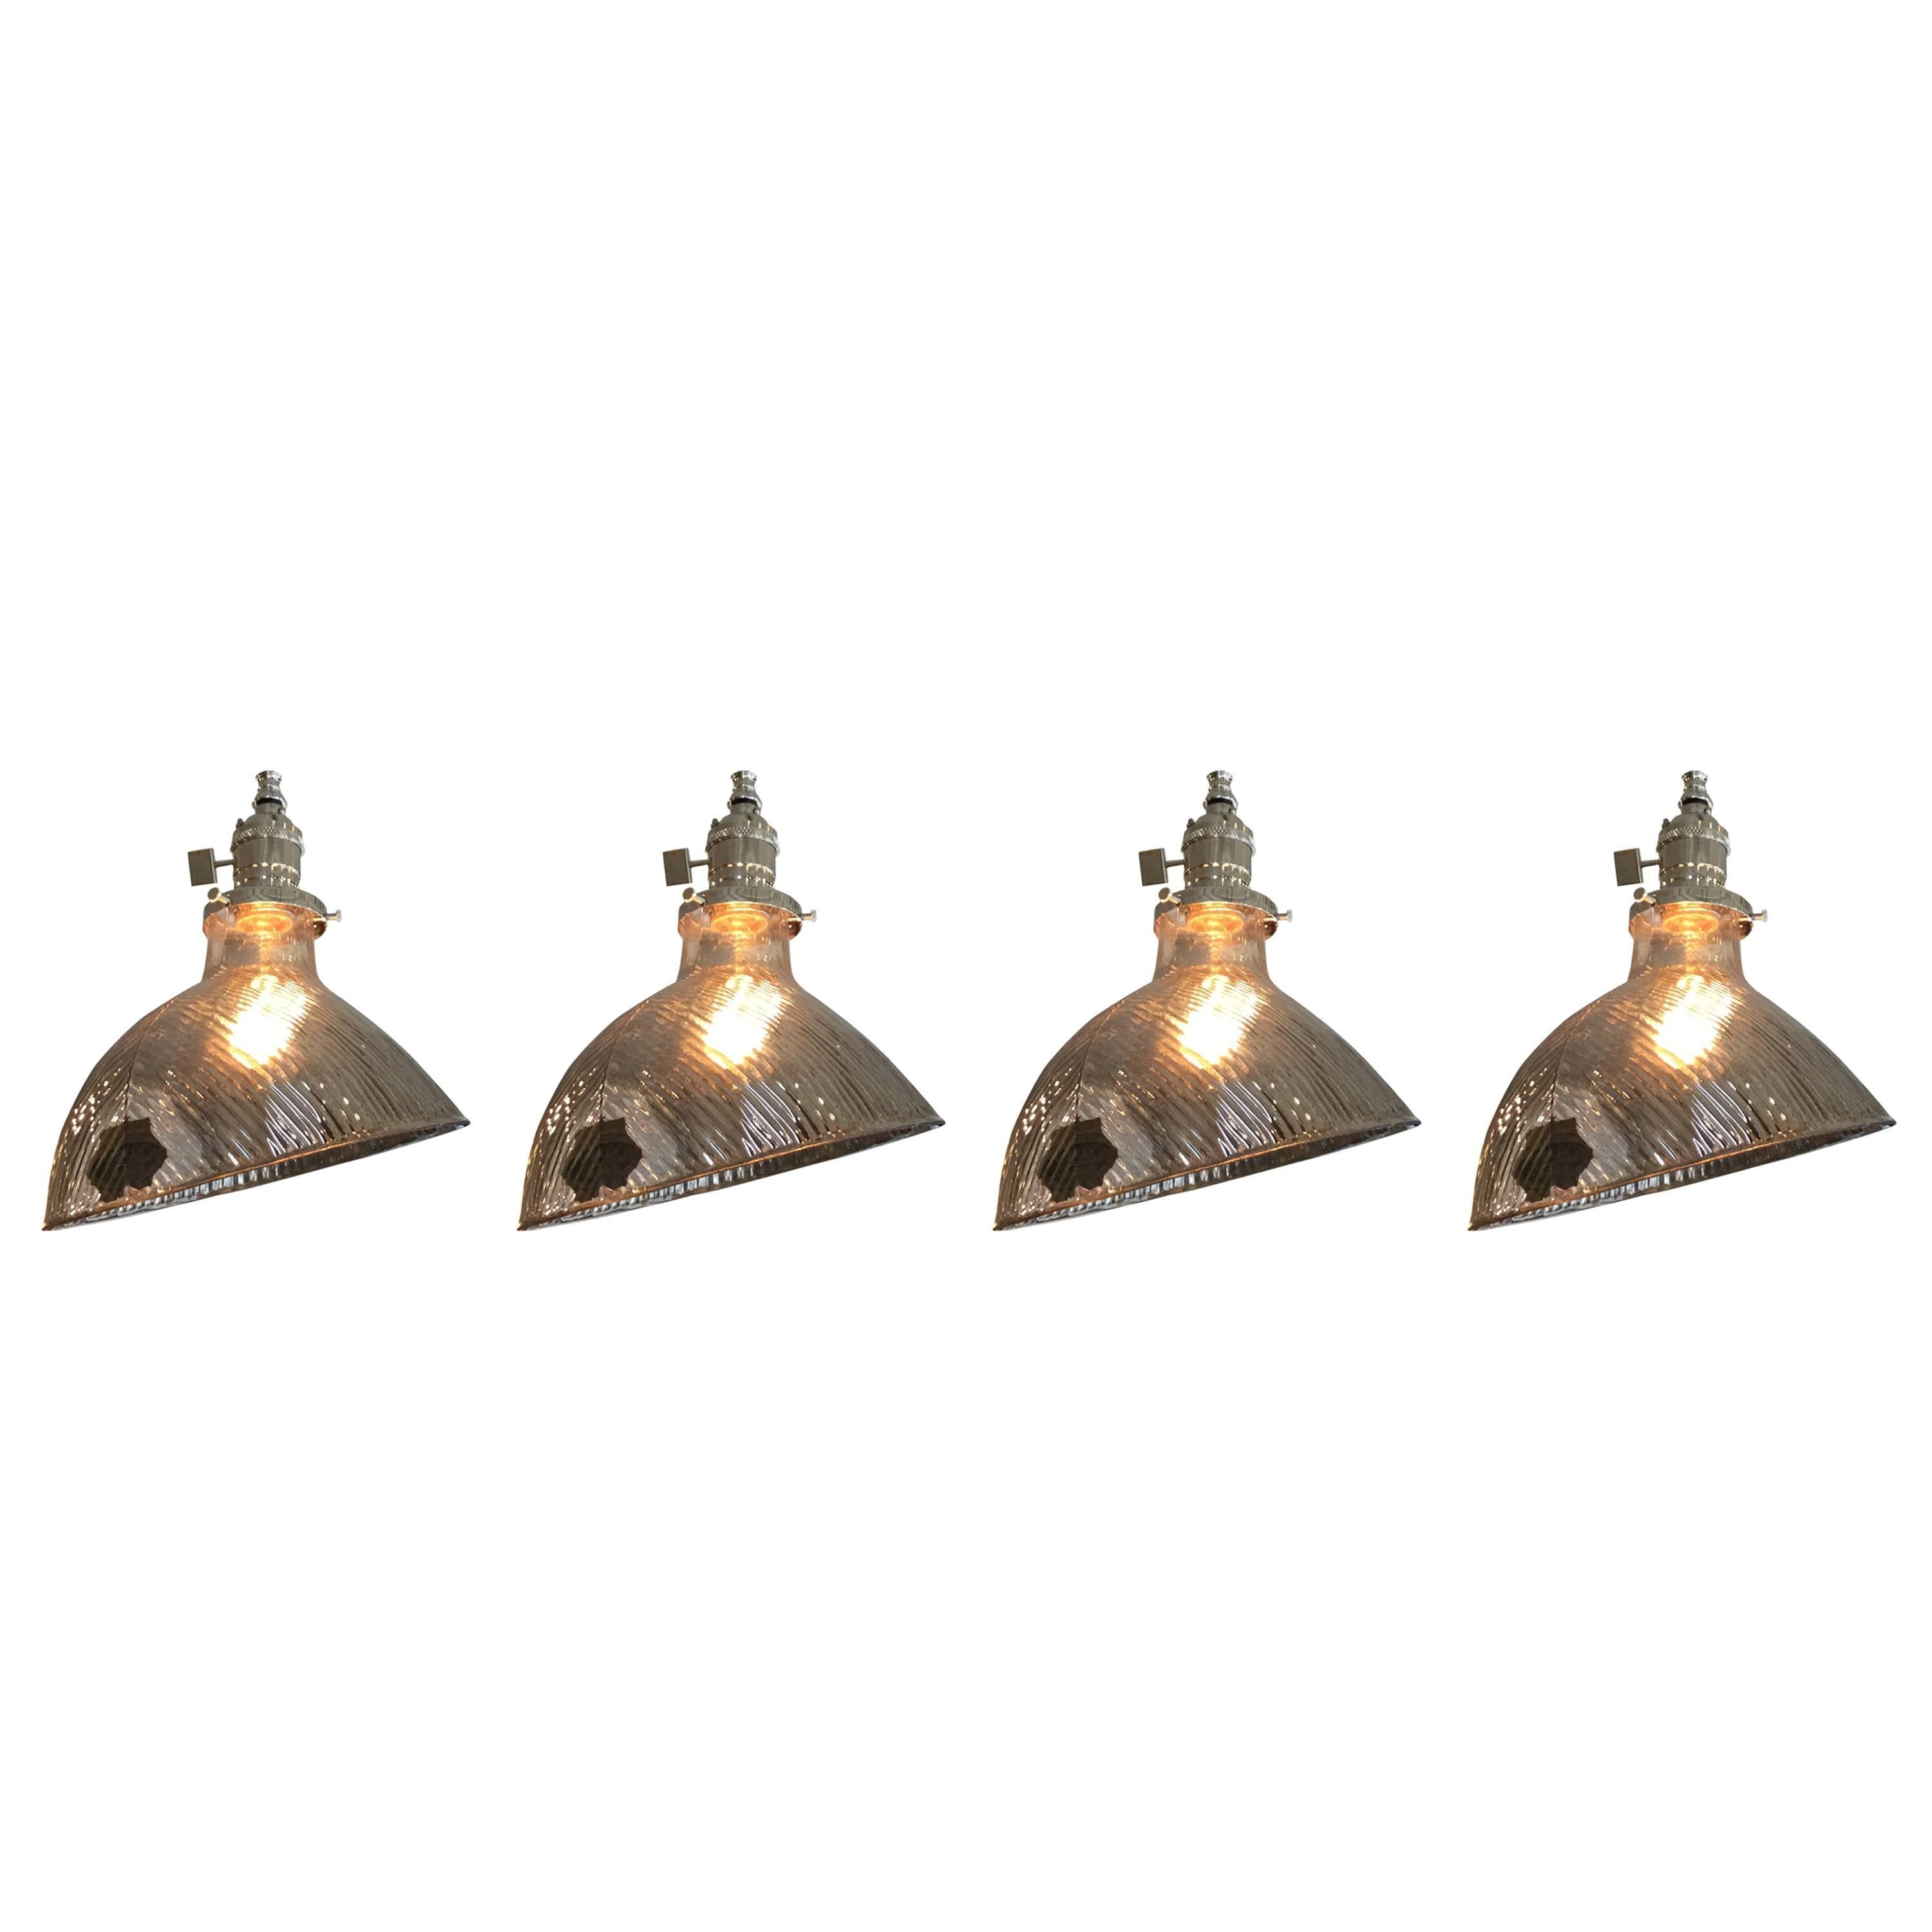 Four Mercury Glass Industrial Pendant Shade Lights For Sale